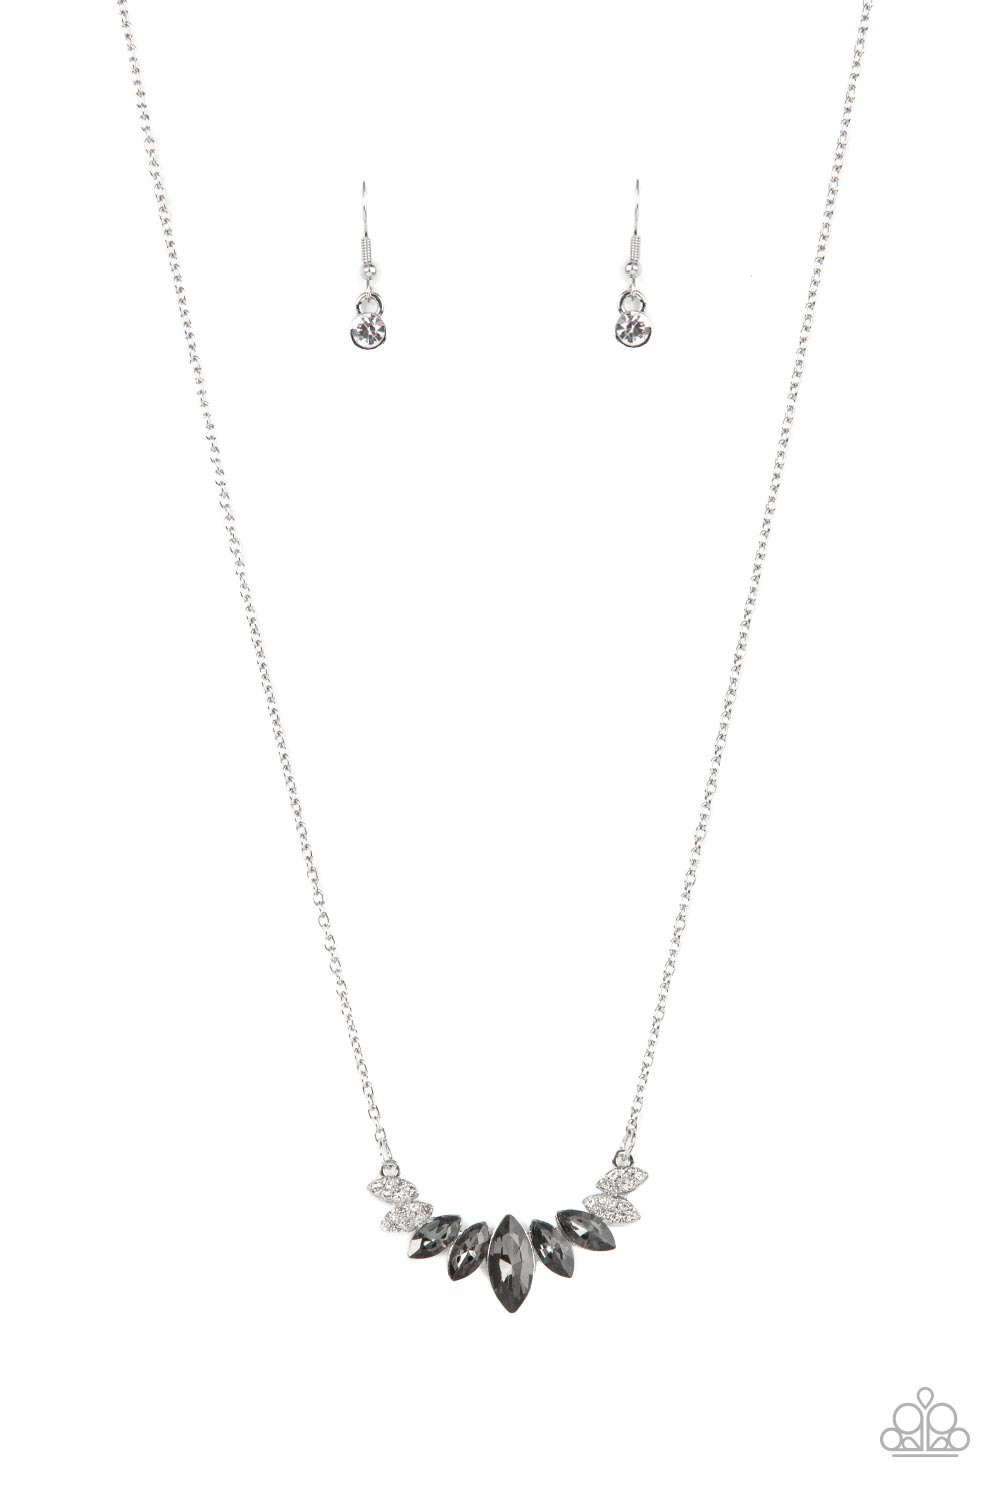 One Empire at a Time Paparazzi Accessories Necklace with Earrings Silver